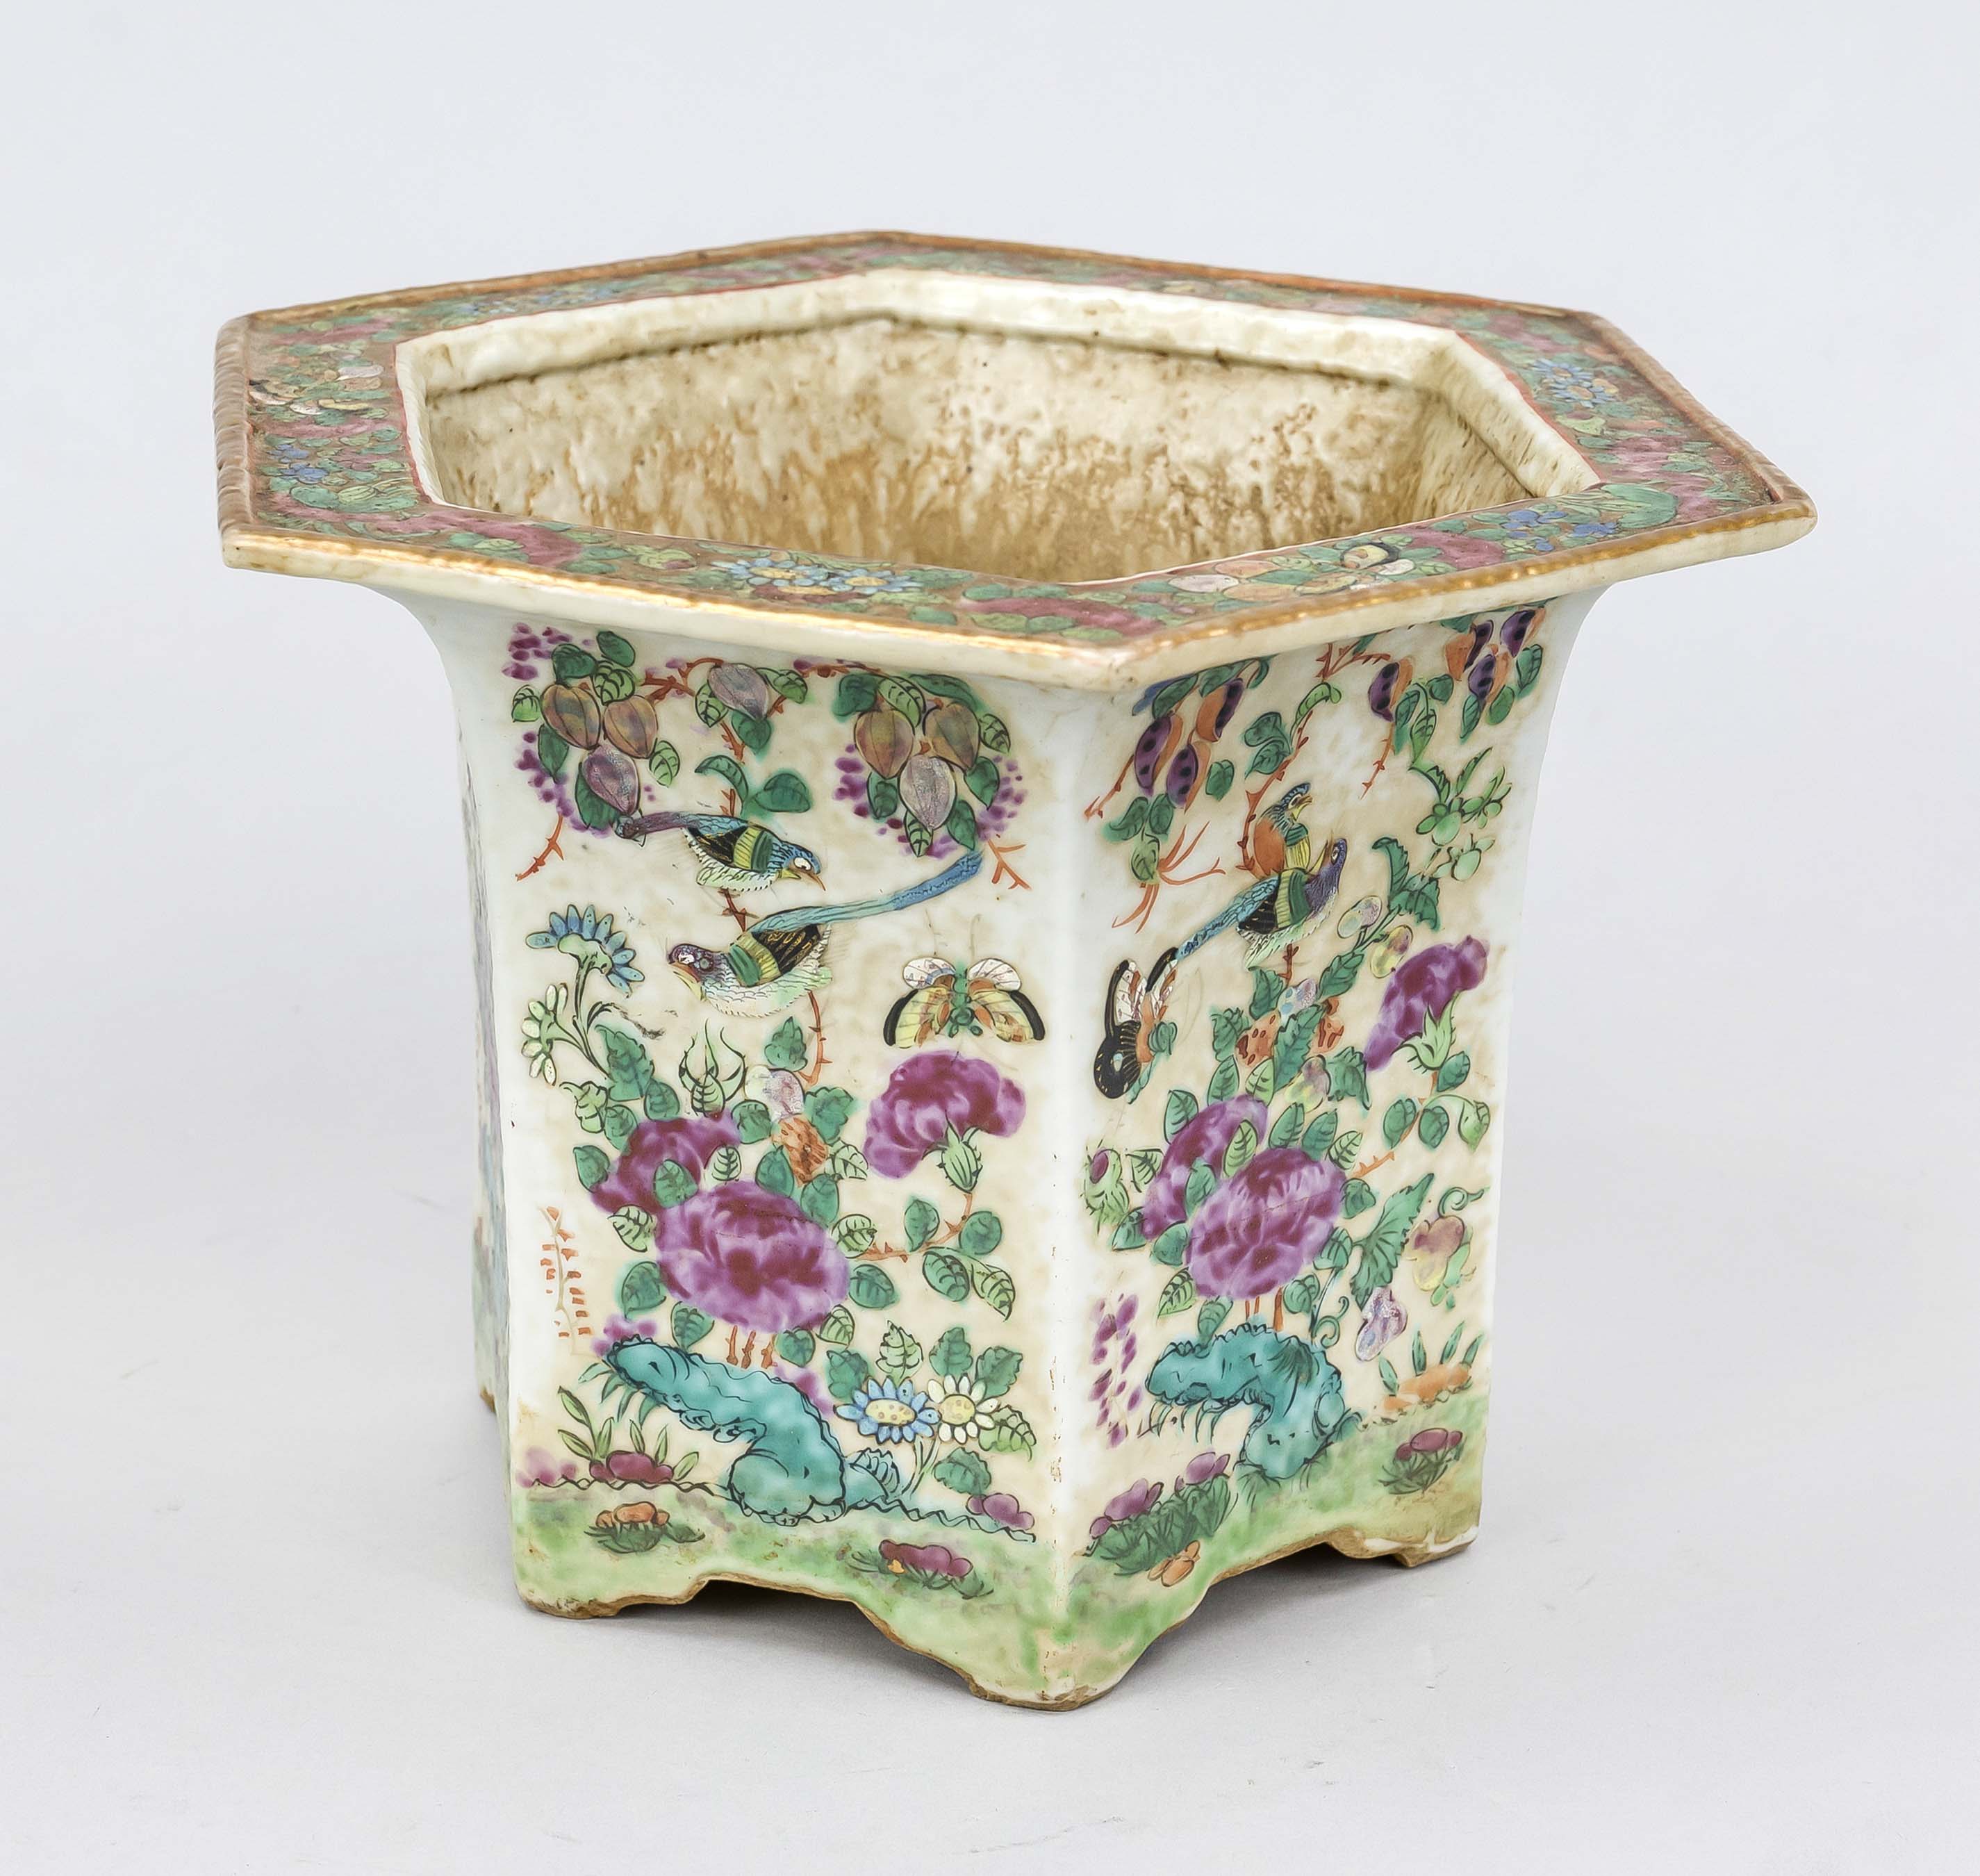 Hexagonal Famille Rose cachepot, China (Canton), 19th century (Qing). All sides decorated with birds